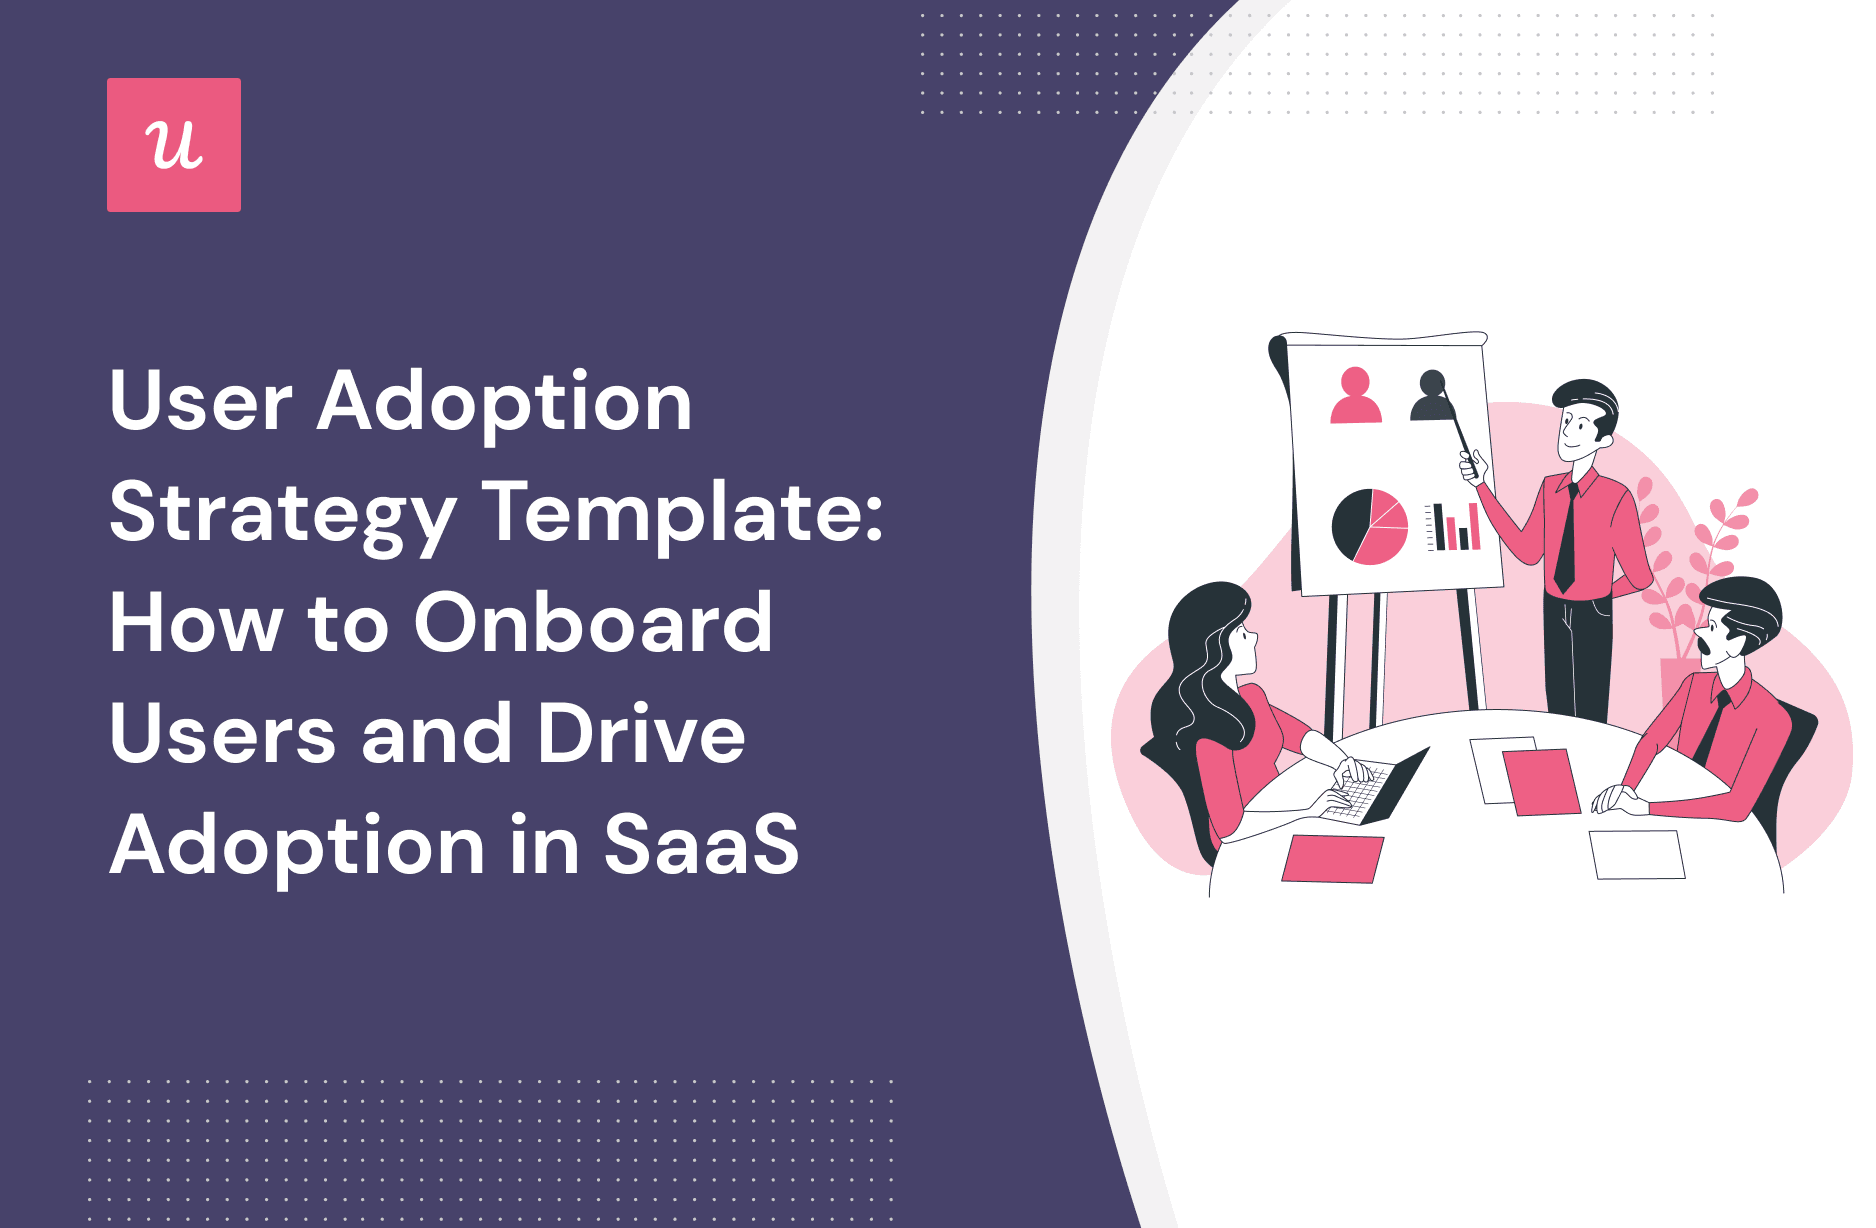 User Adoption Strategy Template: How to Onboard Users and Drive Adoption in SaaS cover